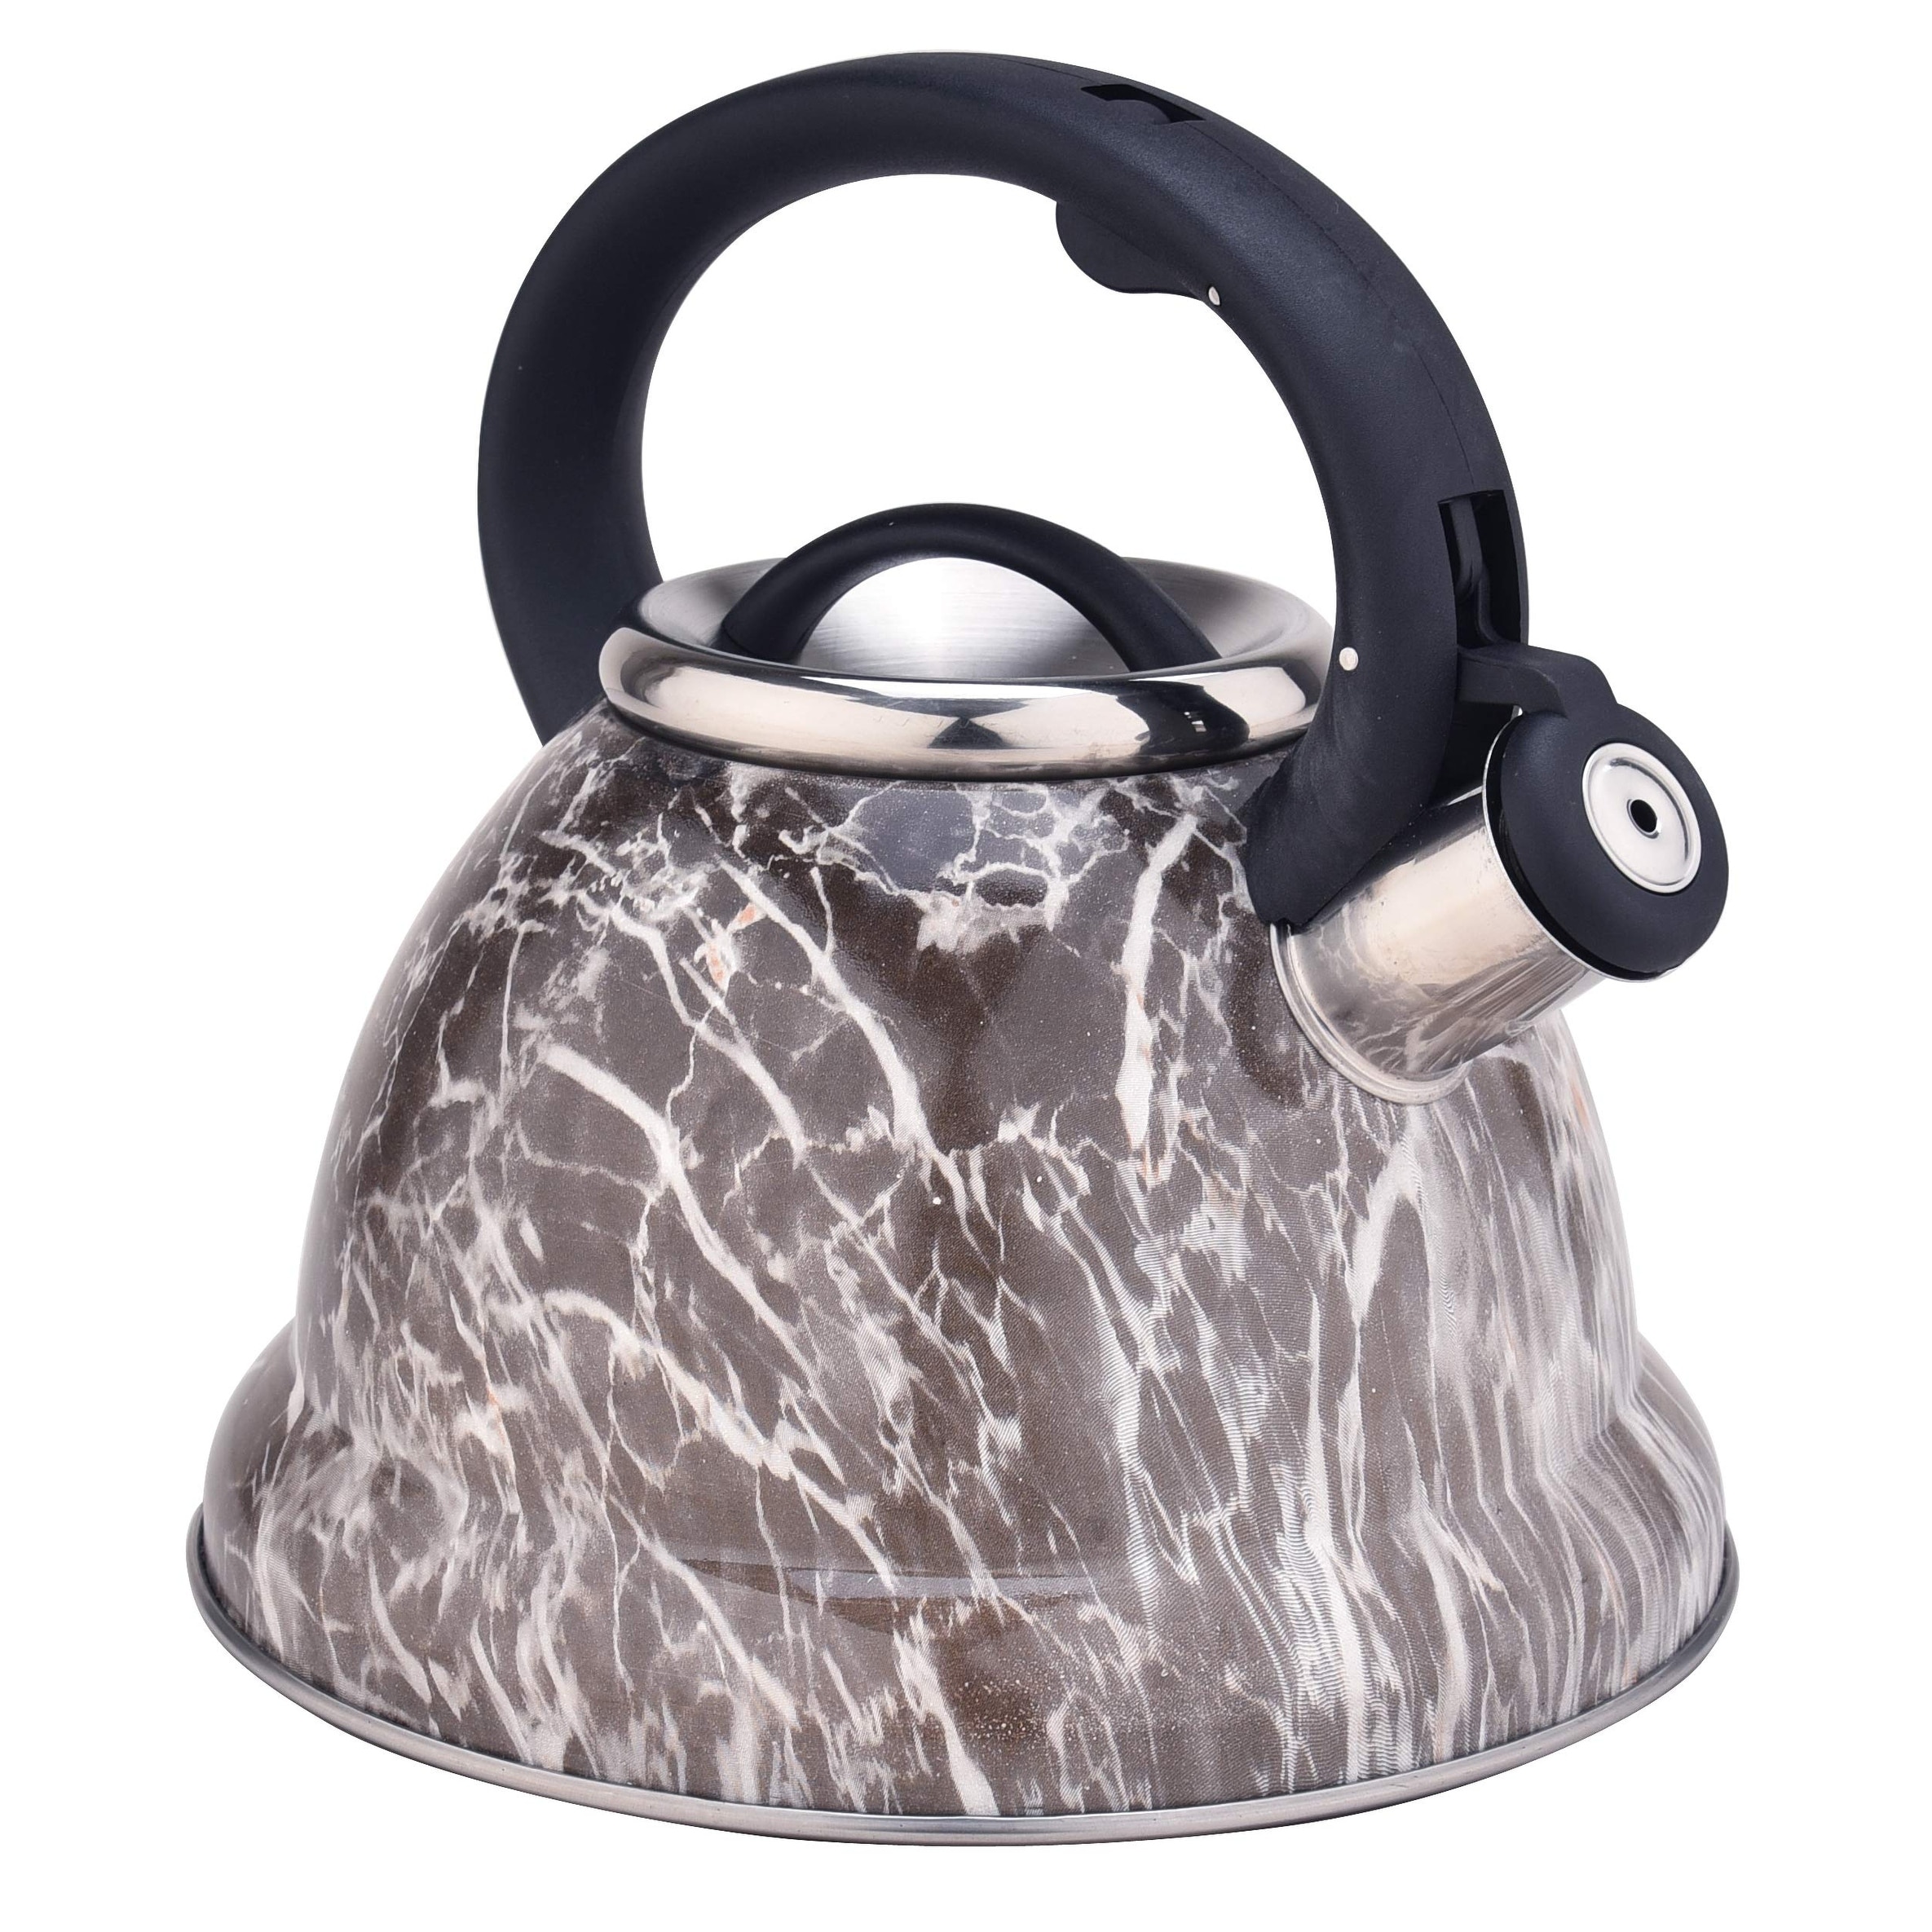 3.2L Stove Top Tea kettle, Food Grade Stove Tea Pot with Heat Resistance Handle, Anti-Rust and Loud Whistling